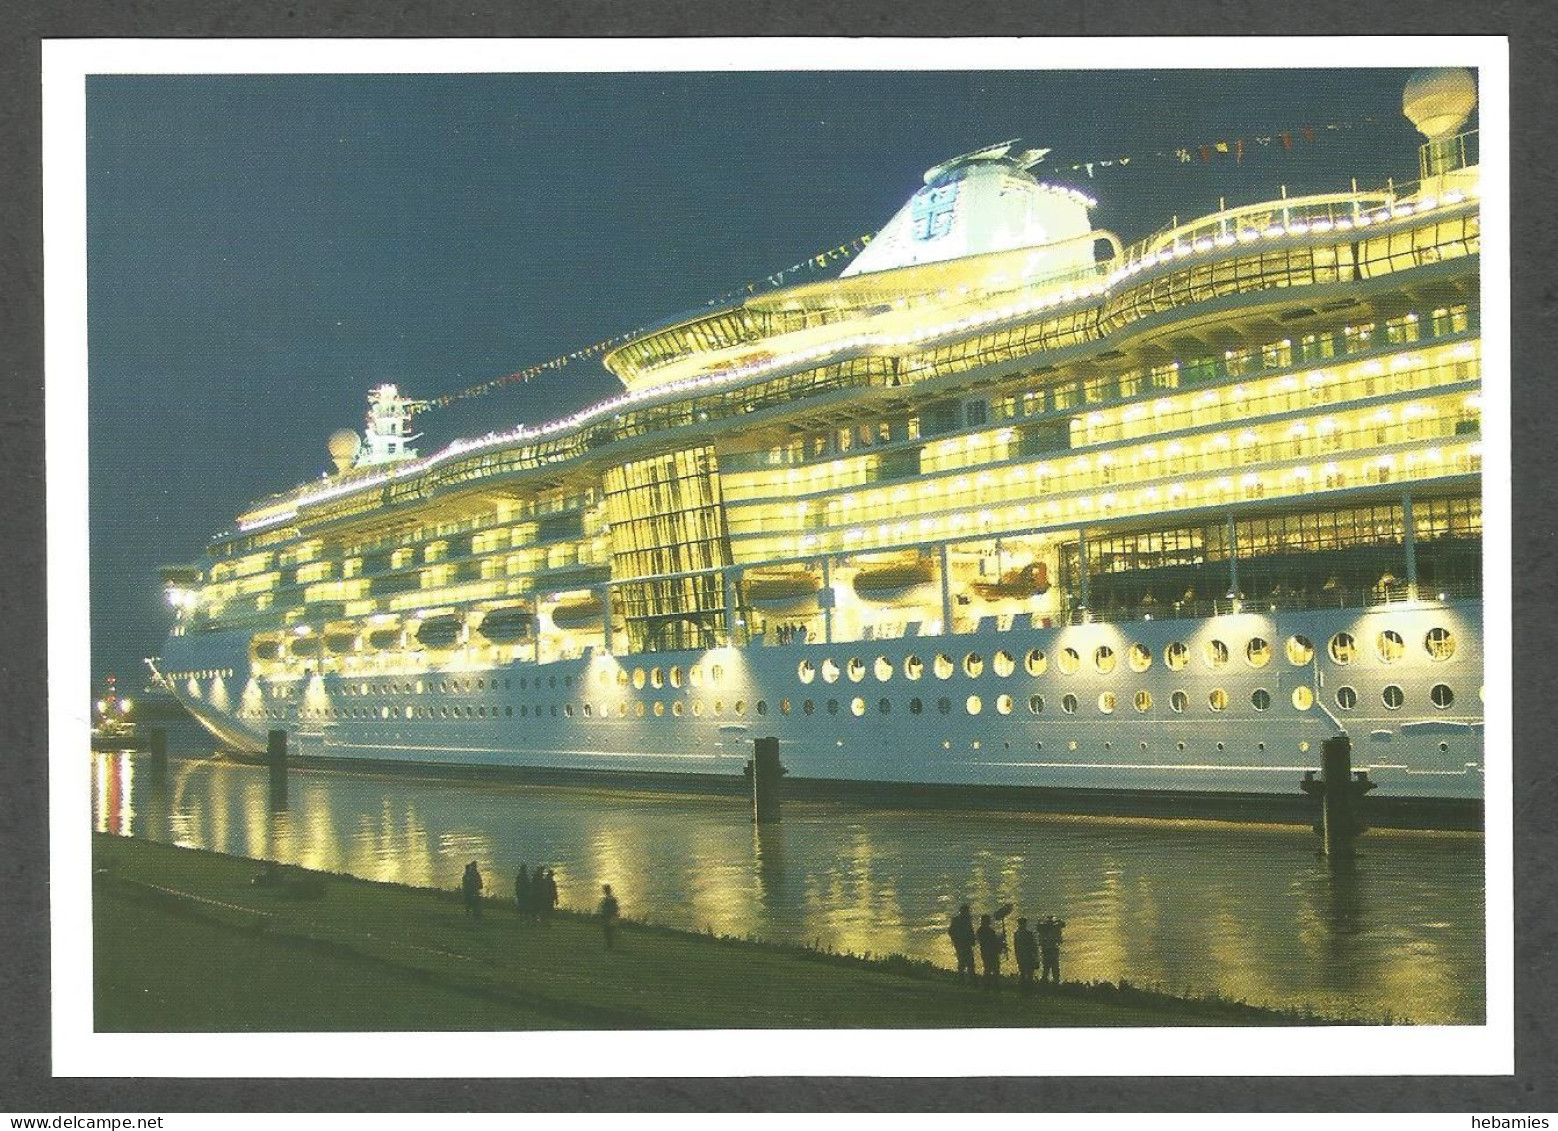 Cruise Liner M/S BRILLIANCE Of The SEAS  - ROYAL CARIBBEAN INTERNATIONAL Shipping Company - - Veerboten